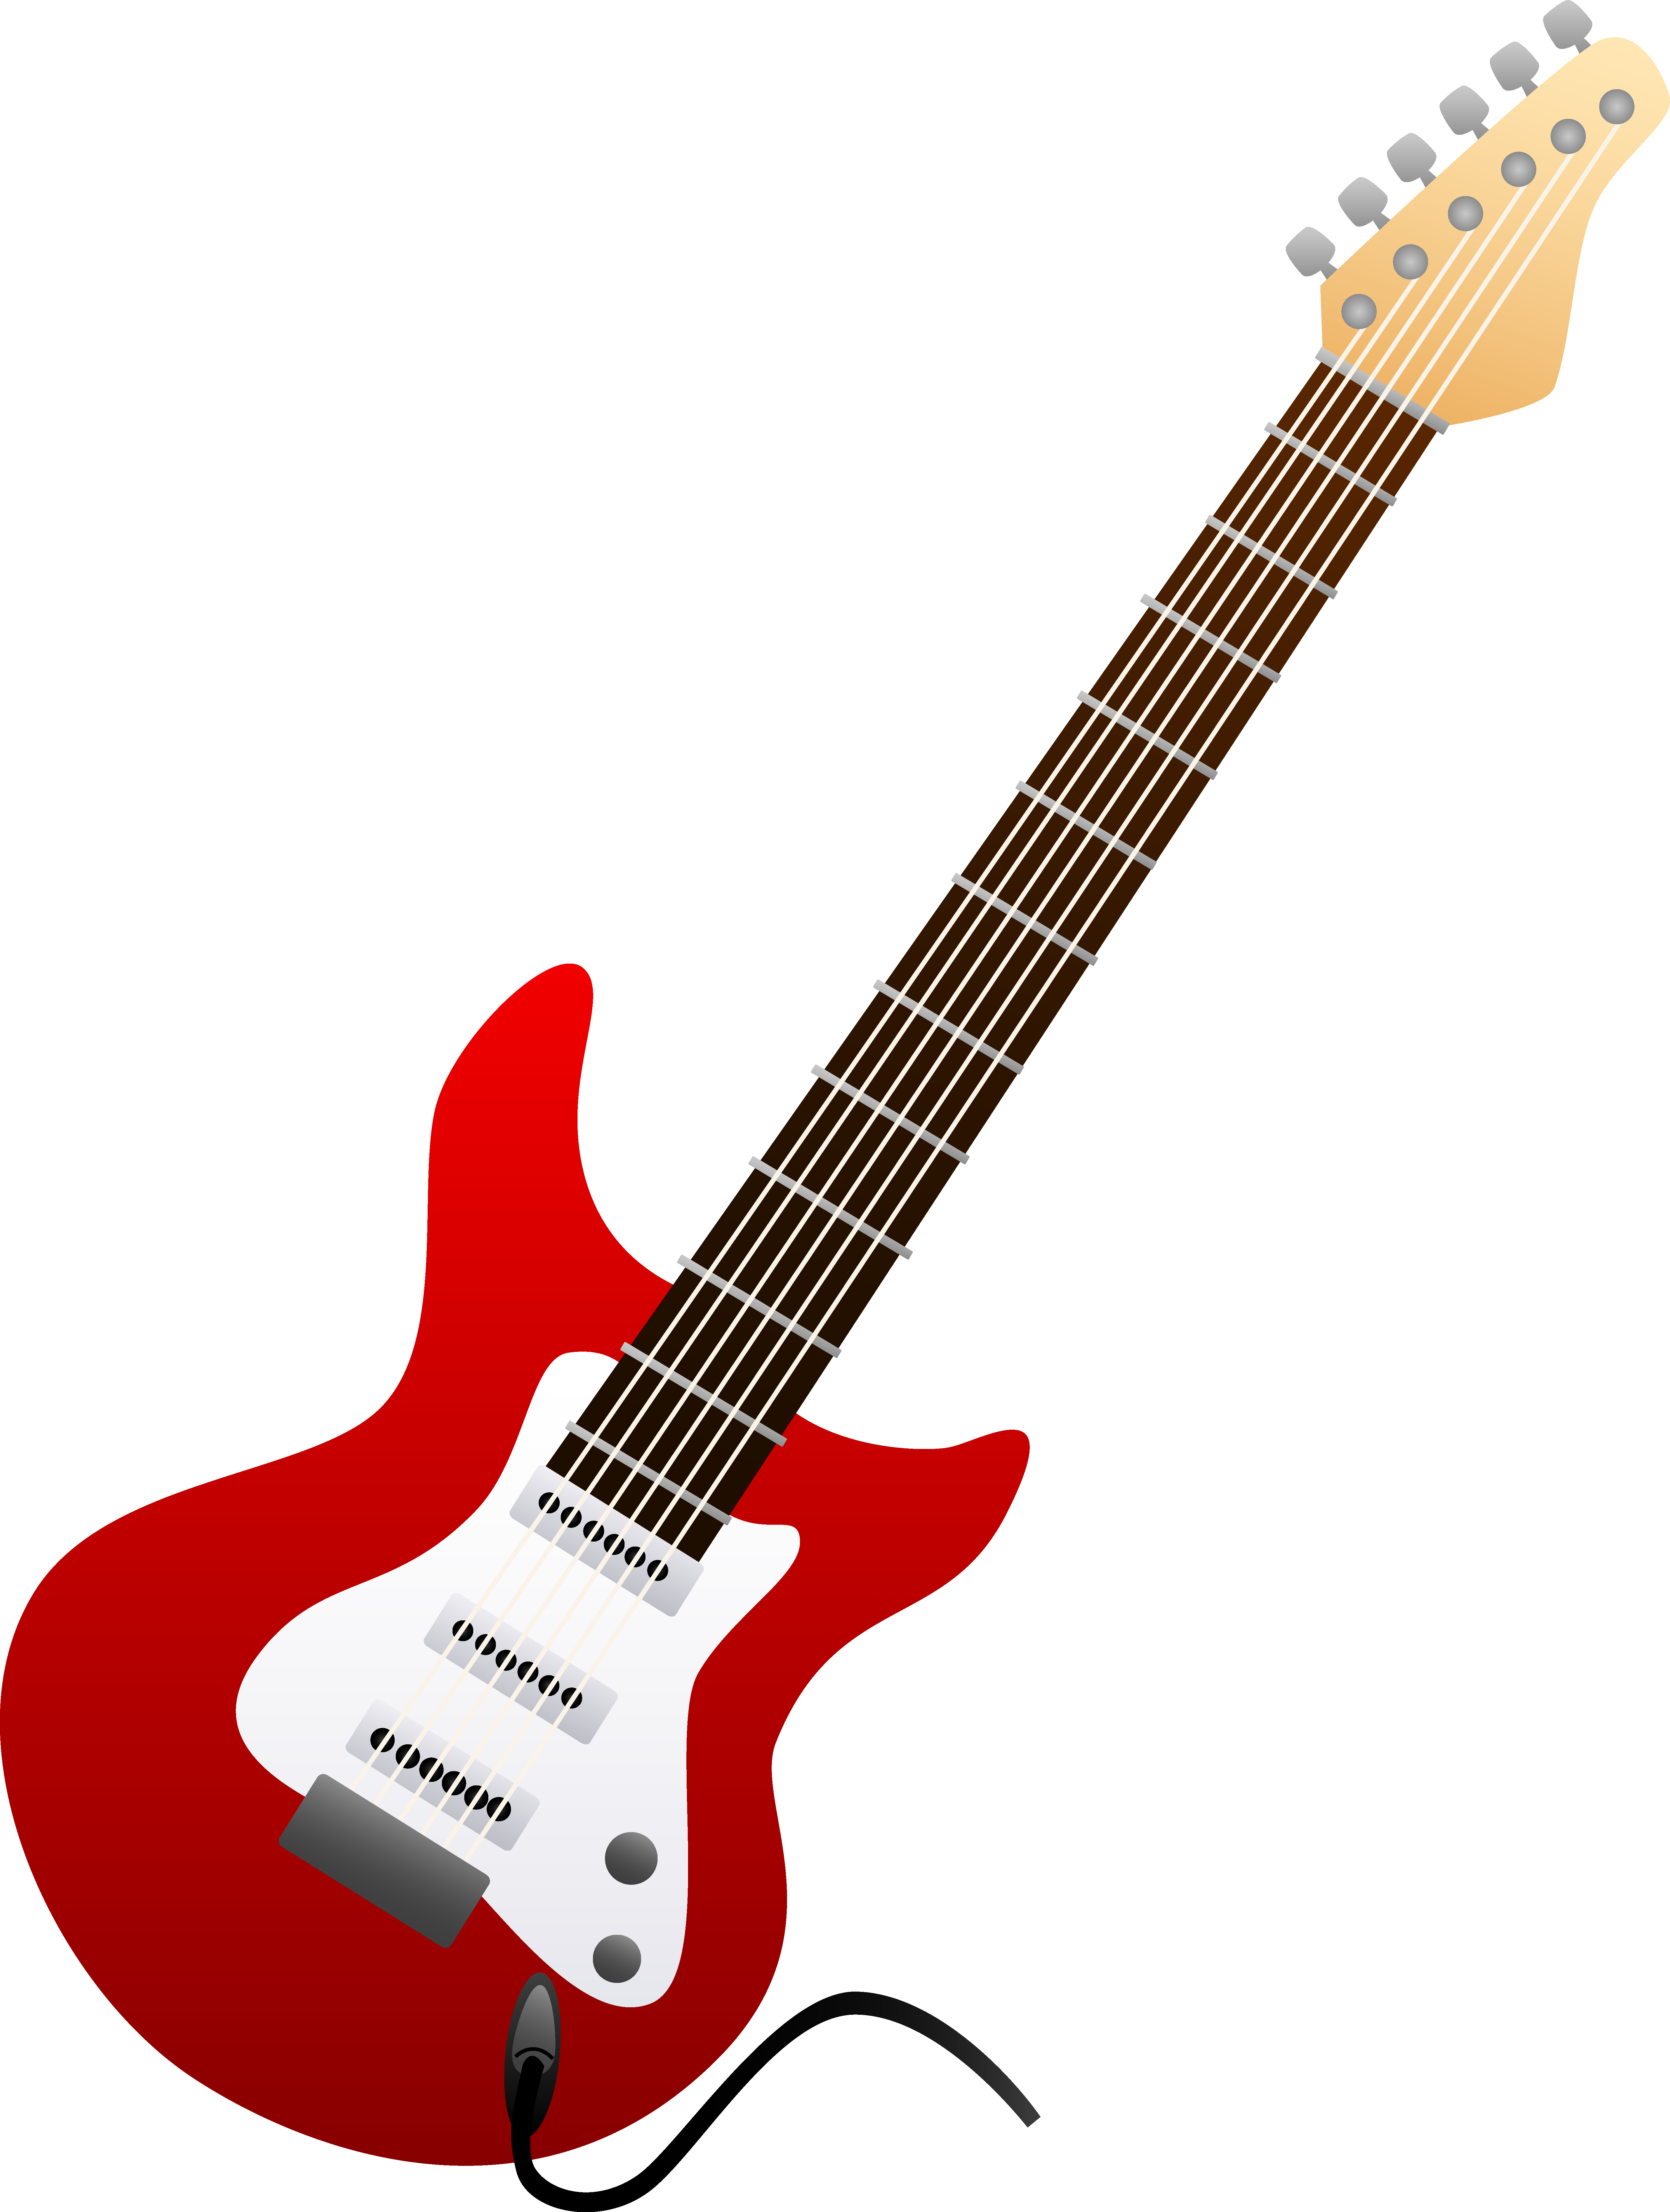 Electric Guitar Red image - vector clip art online, royalty free ...